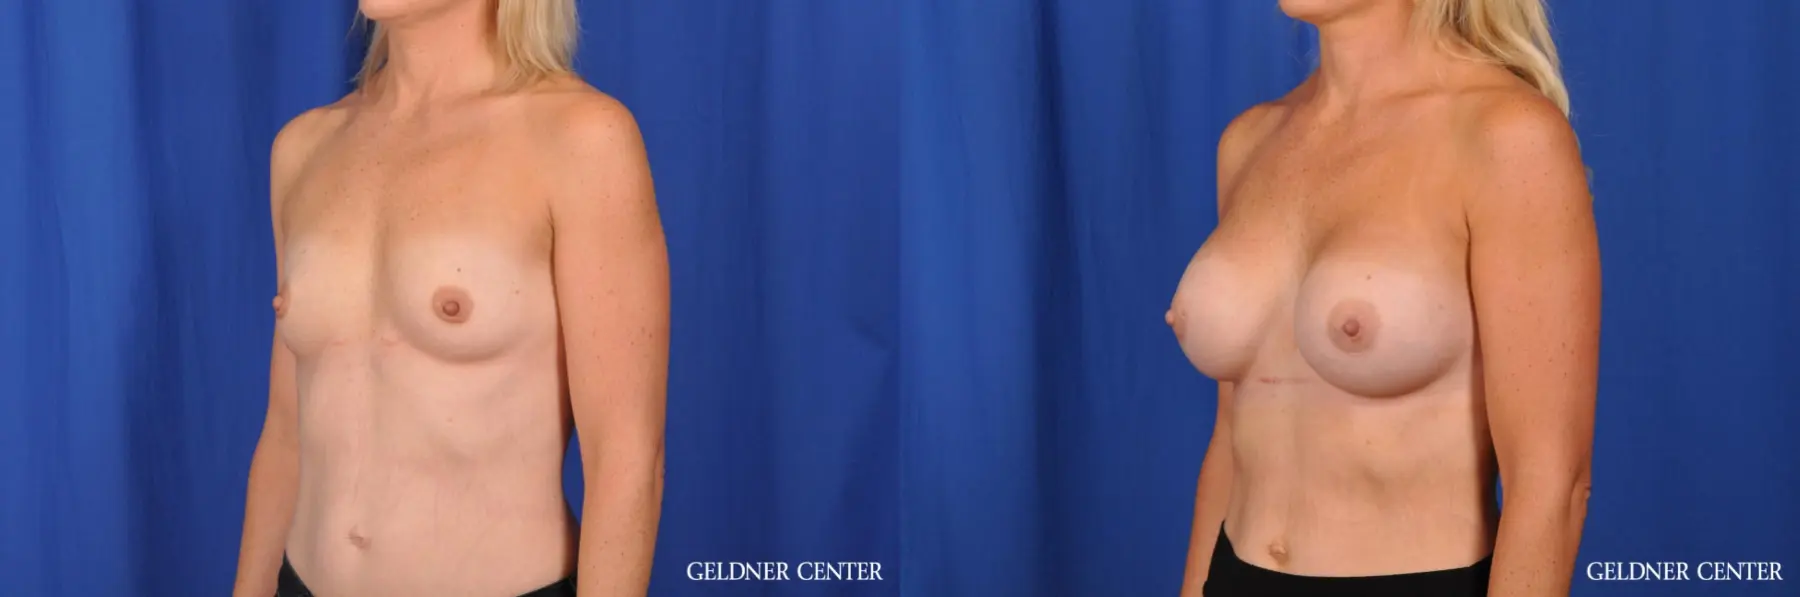 Chicago Breast Augmentation: Patient 1 - Before and After 4